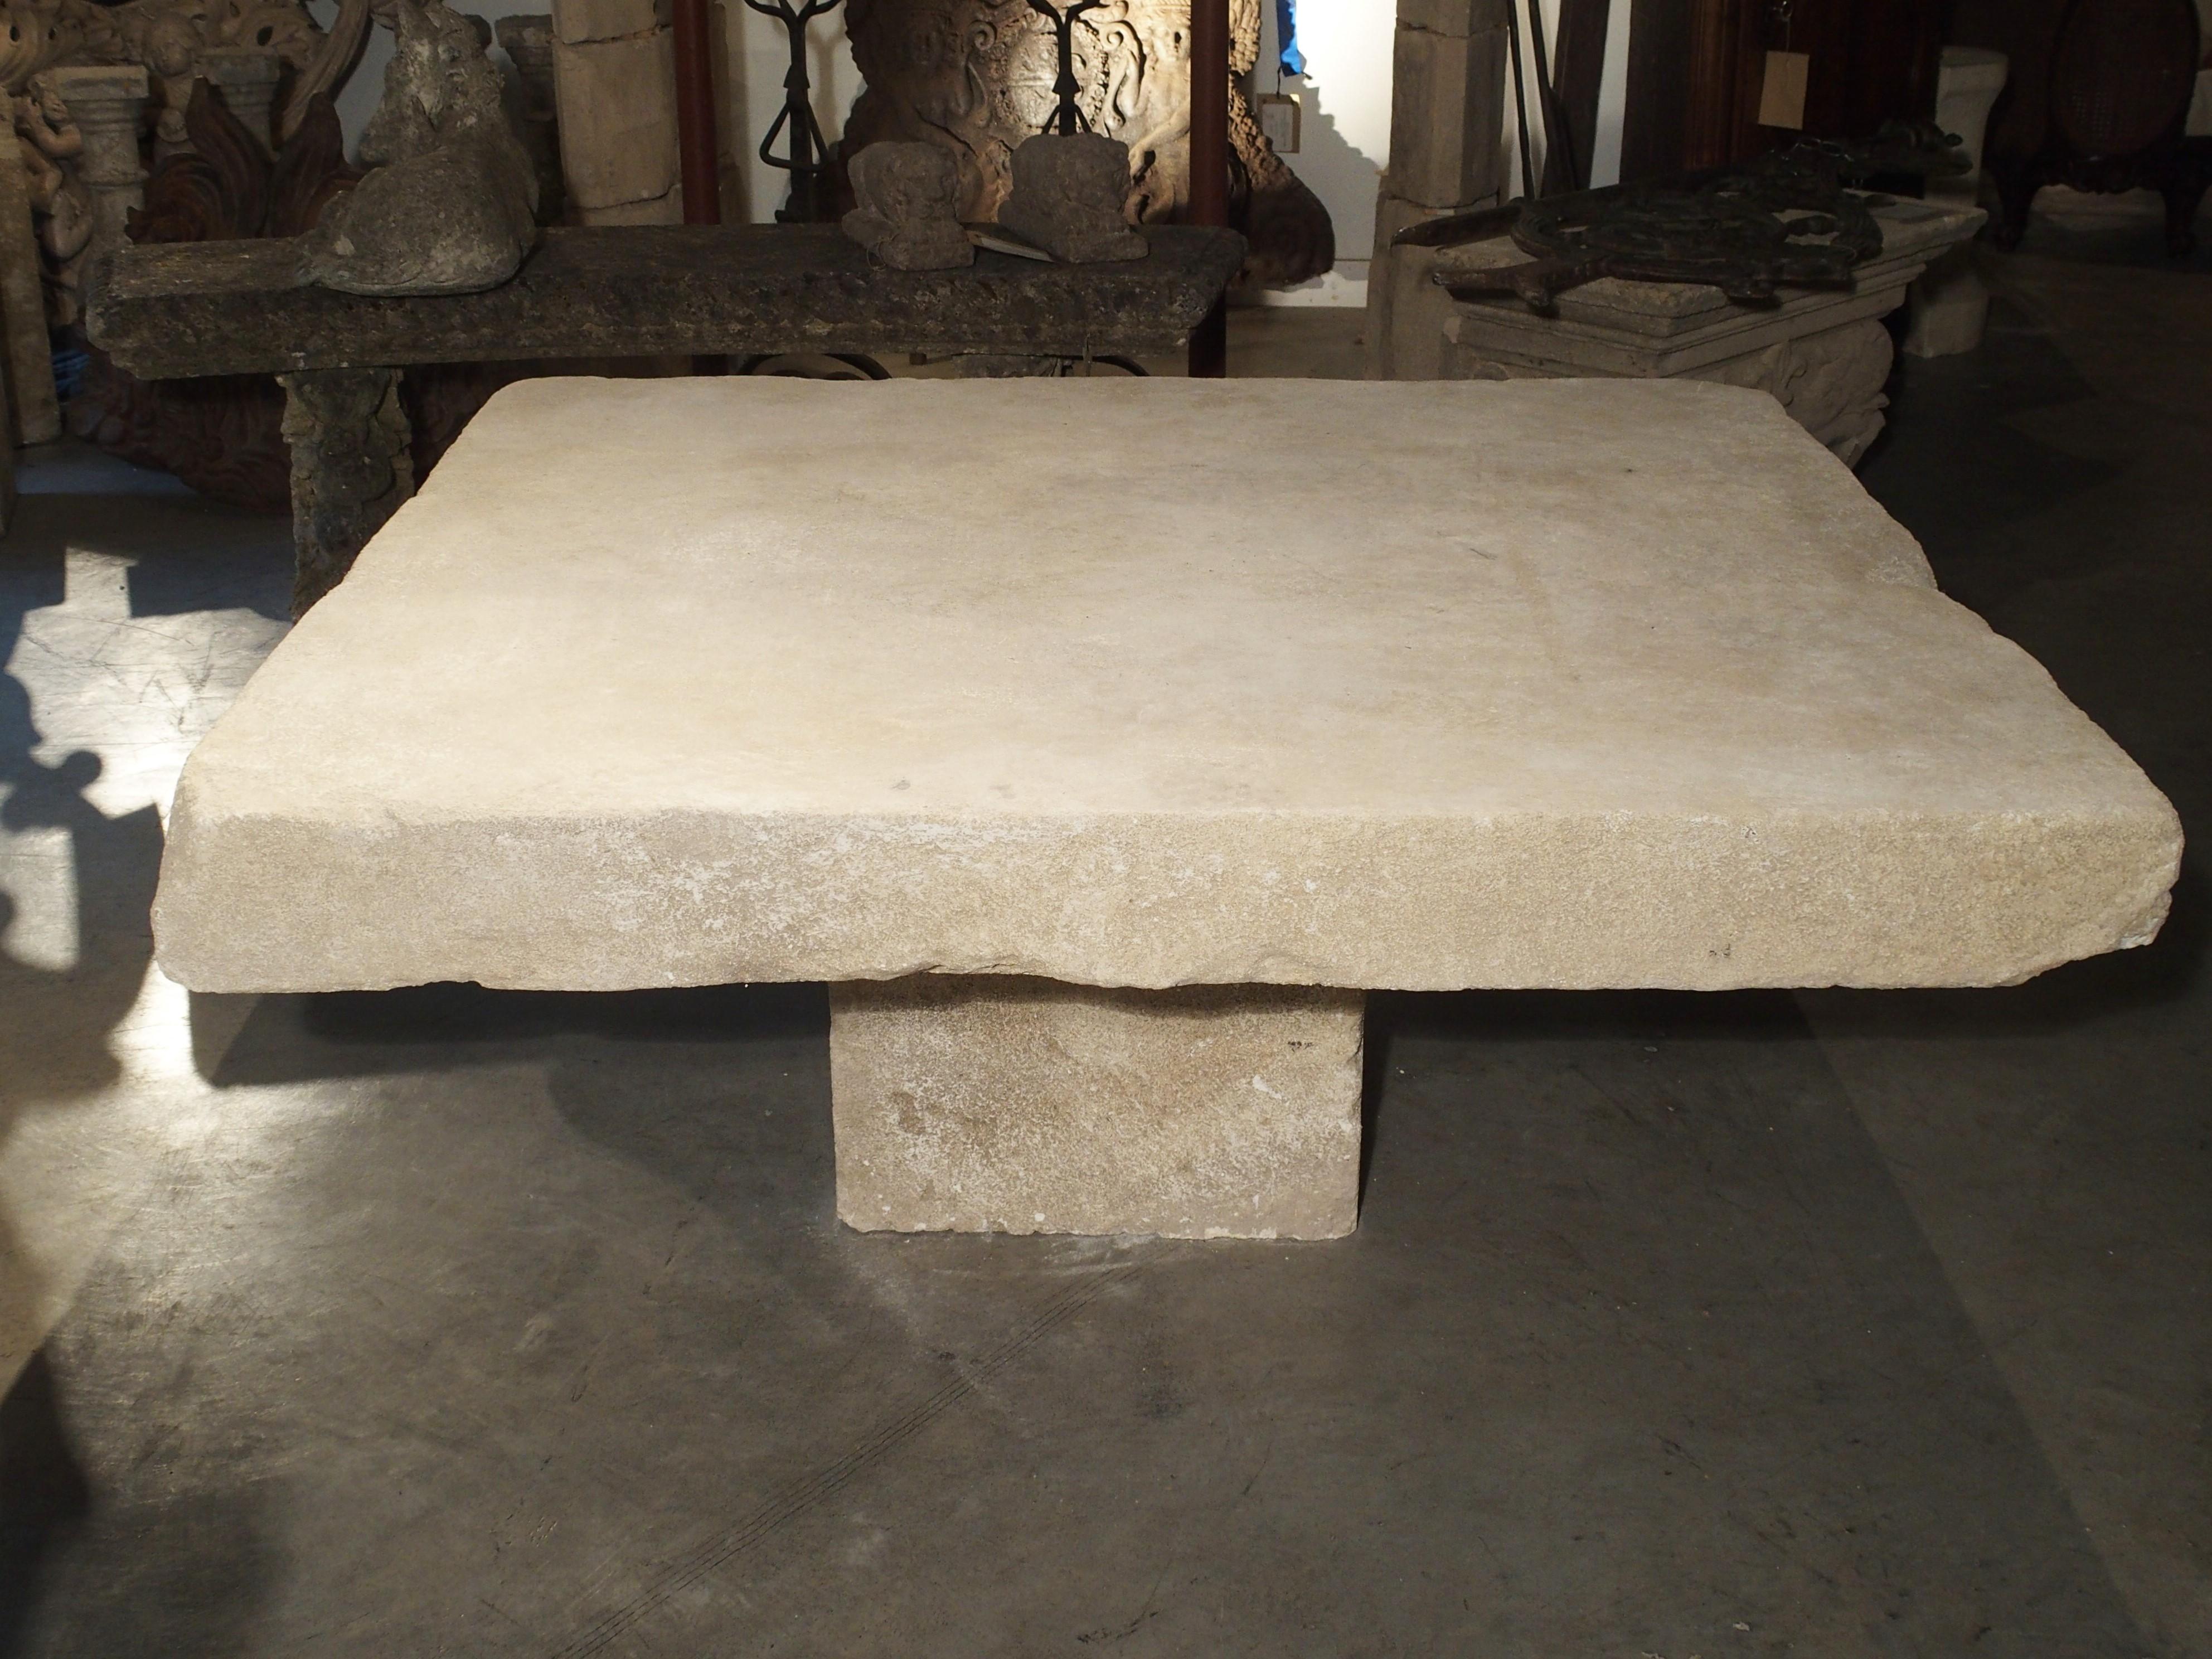 Hand-Carved Large Limestone Coffee Table from Provence, France